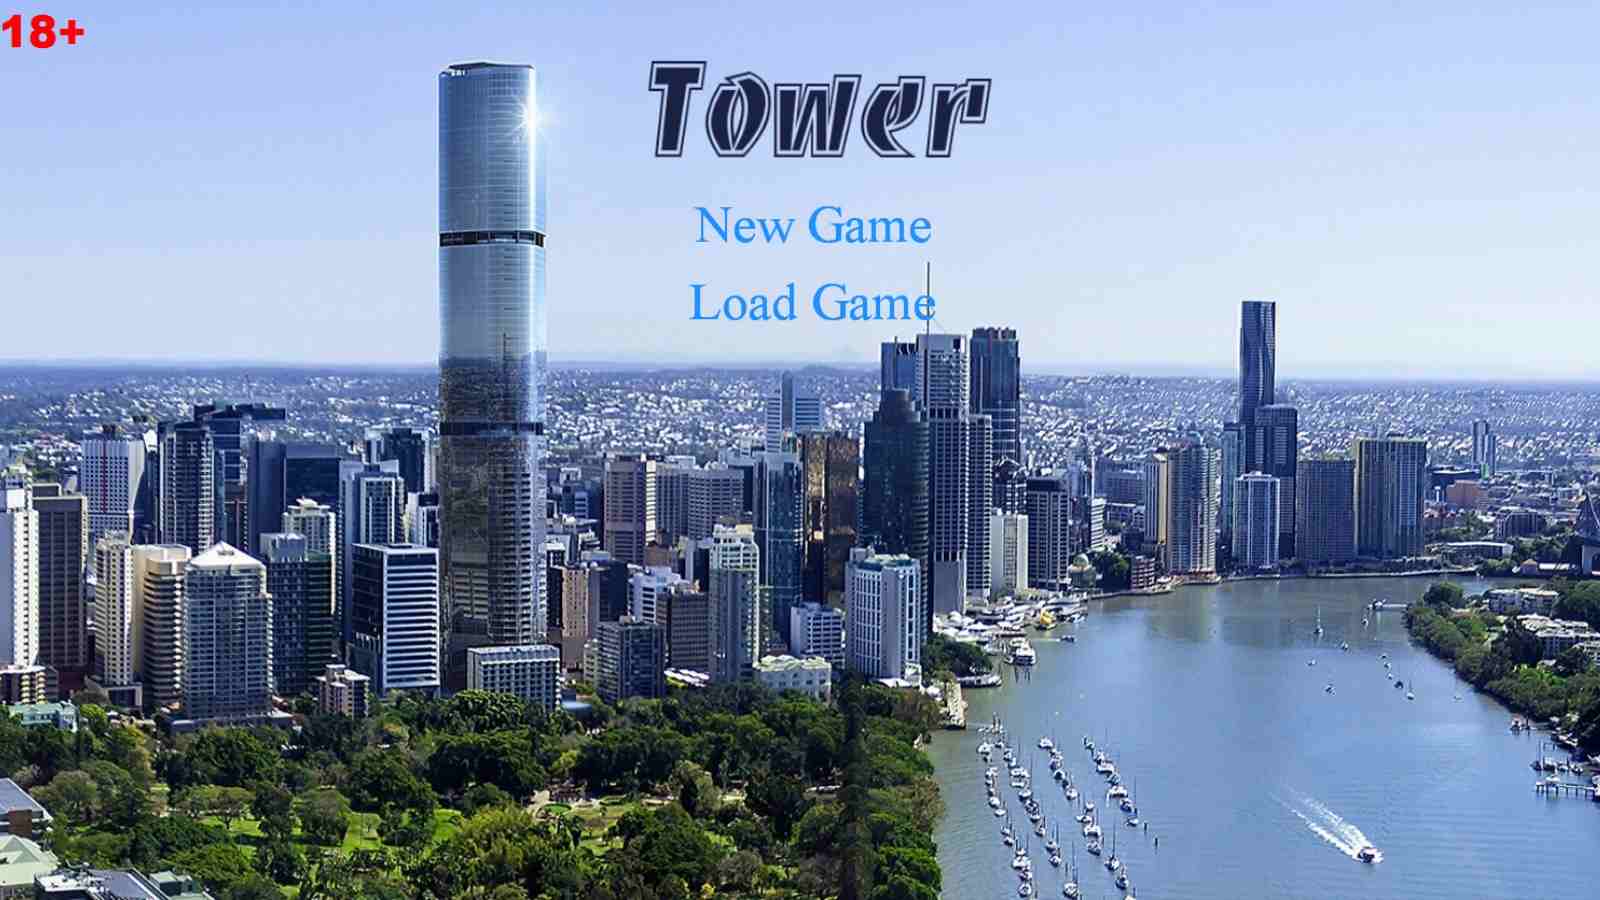 Tower Towergames Adult xxx Game Download